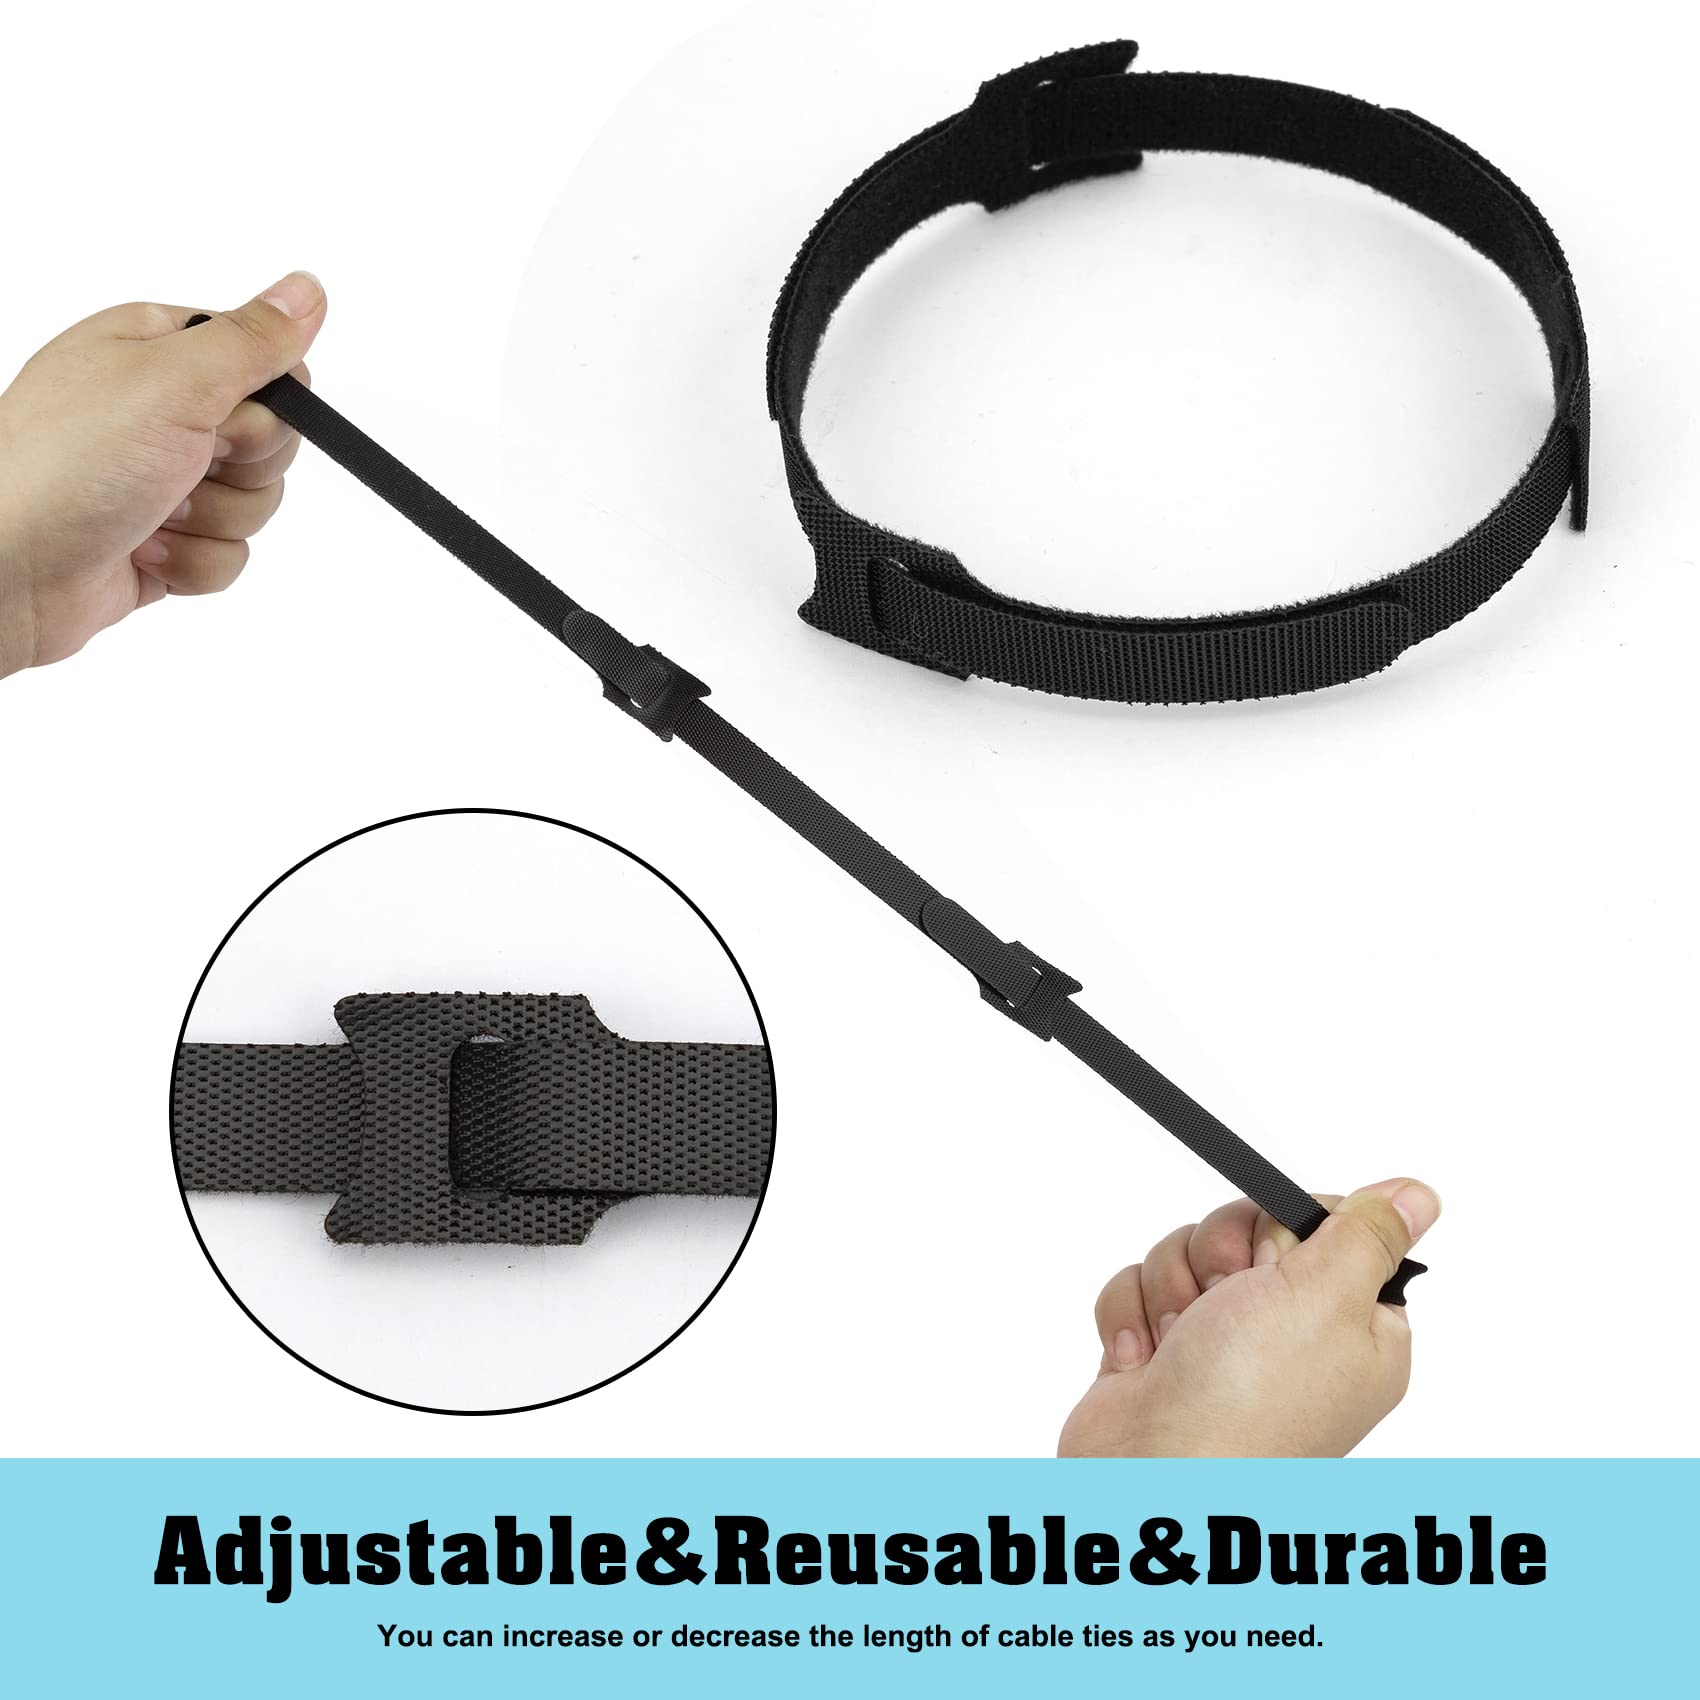 Reusable Cable Ties 120PCS Adjustable 6 Inch Cord Ties Fastening Wire Straps Cable Organizer Wire Ties Cable Management Hook Loop Cord Organizer for Electronics Home Office PC TV Organizing (Black)